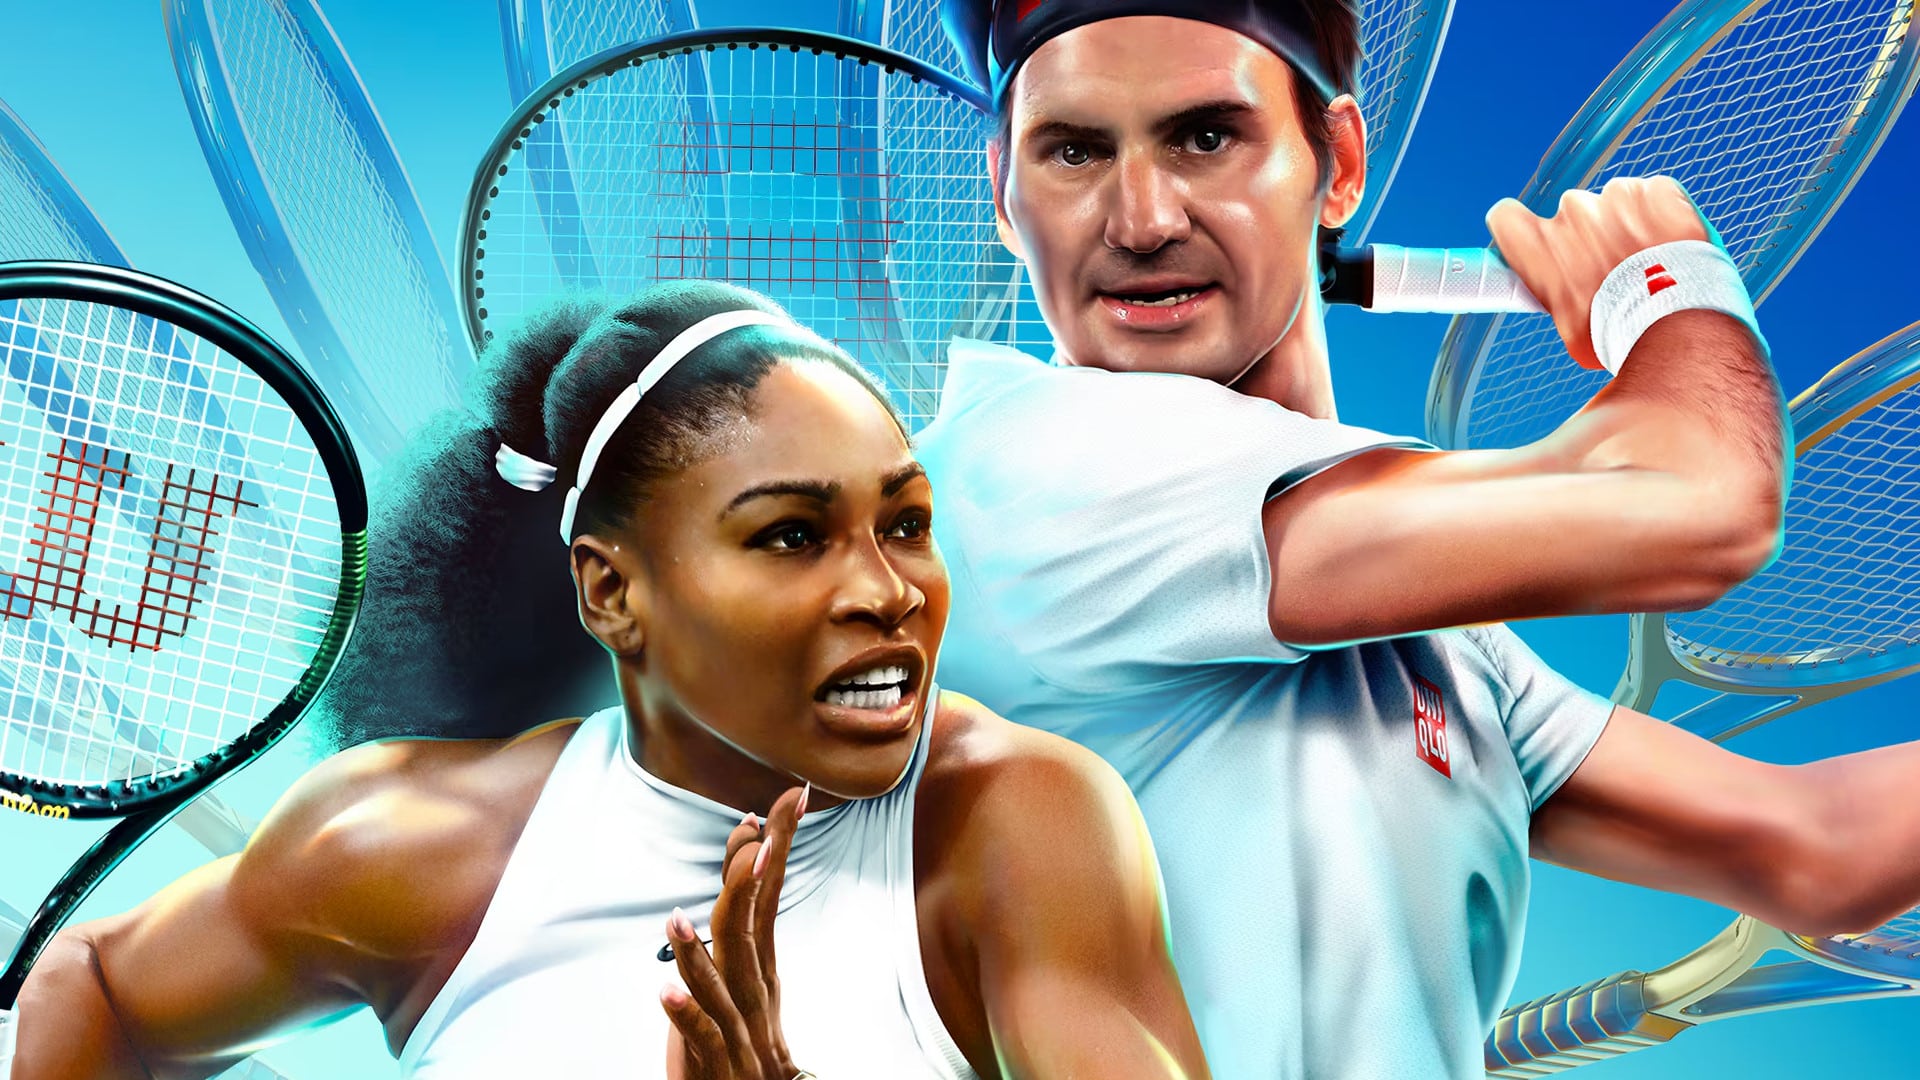 play3 Review: TopSpin 2K25 im Test: Starkes Tennis-Comeback!